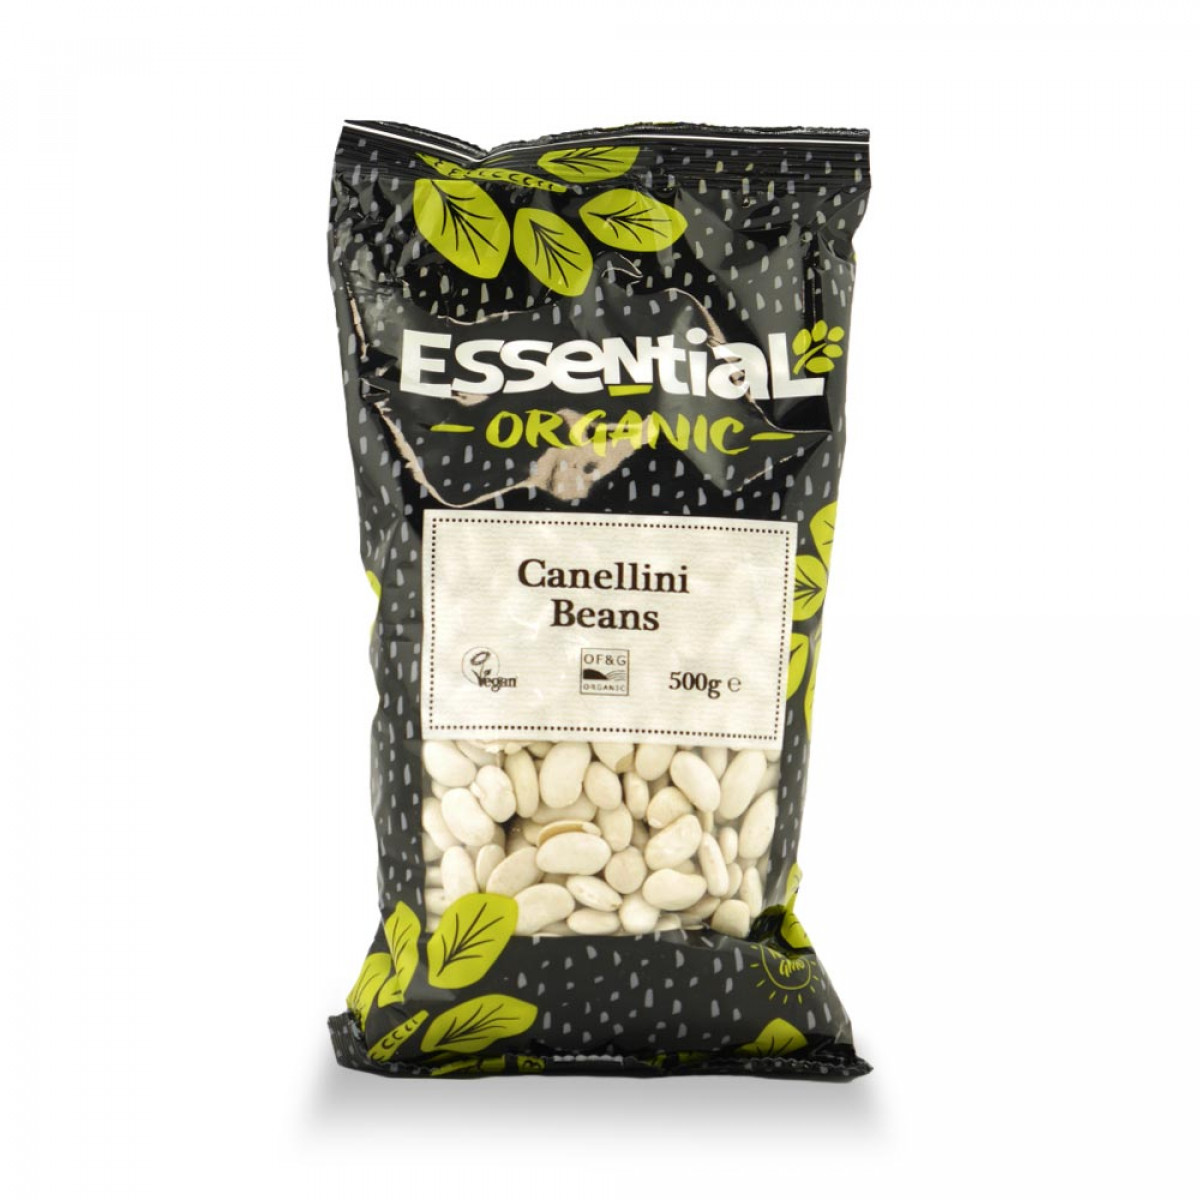 Product picture for Cannellini Beans